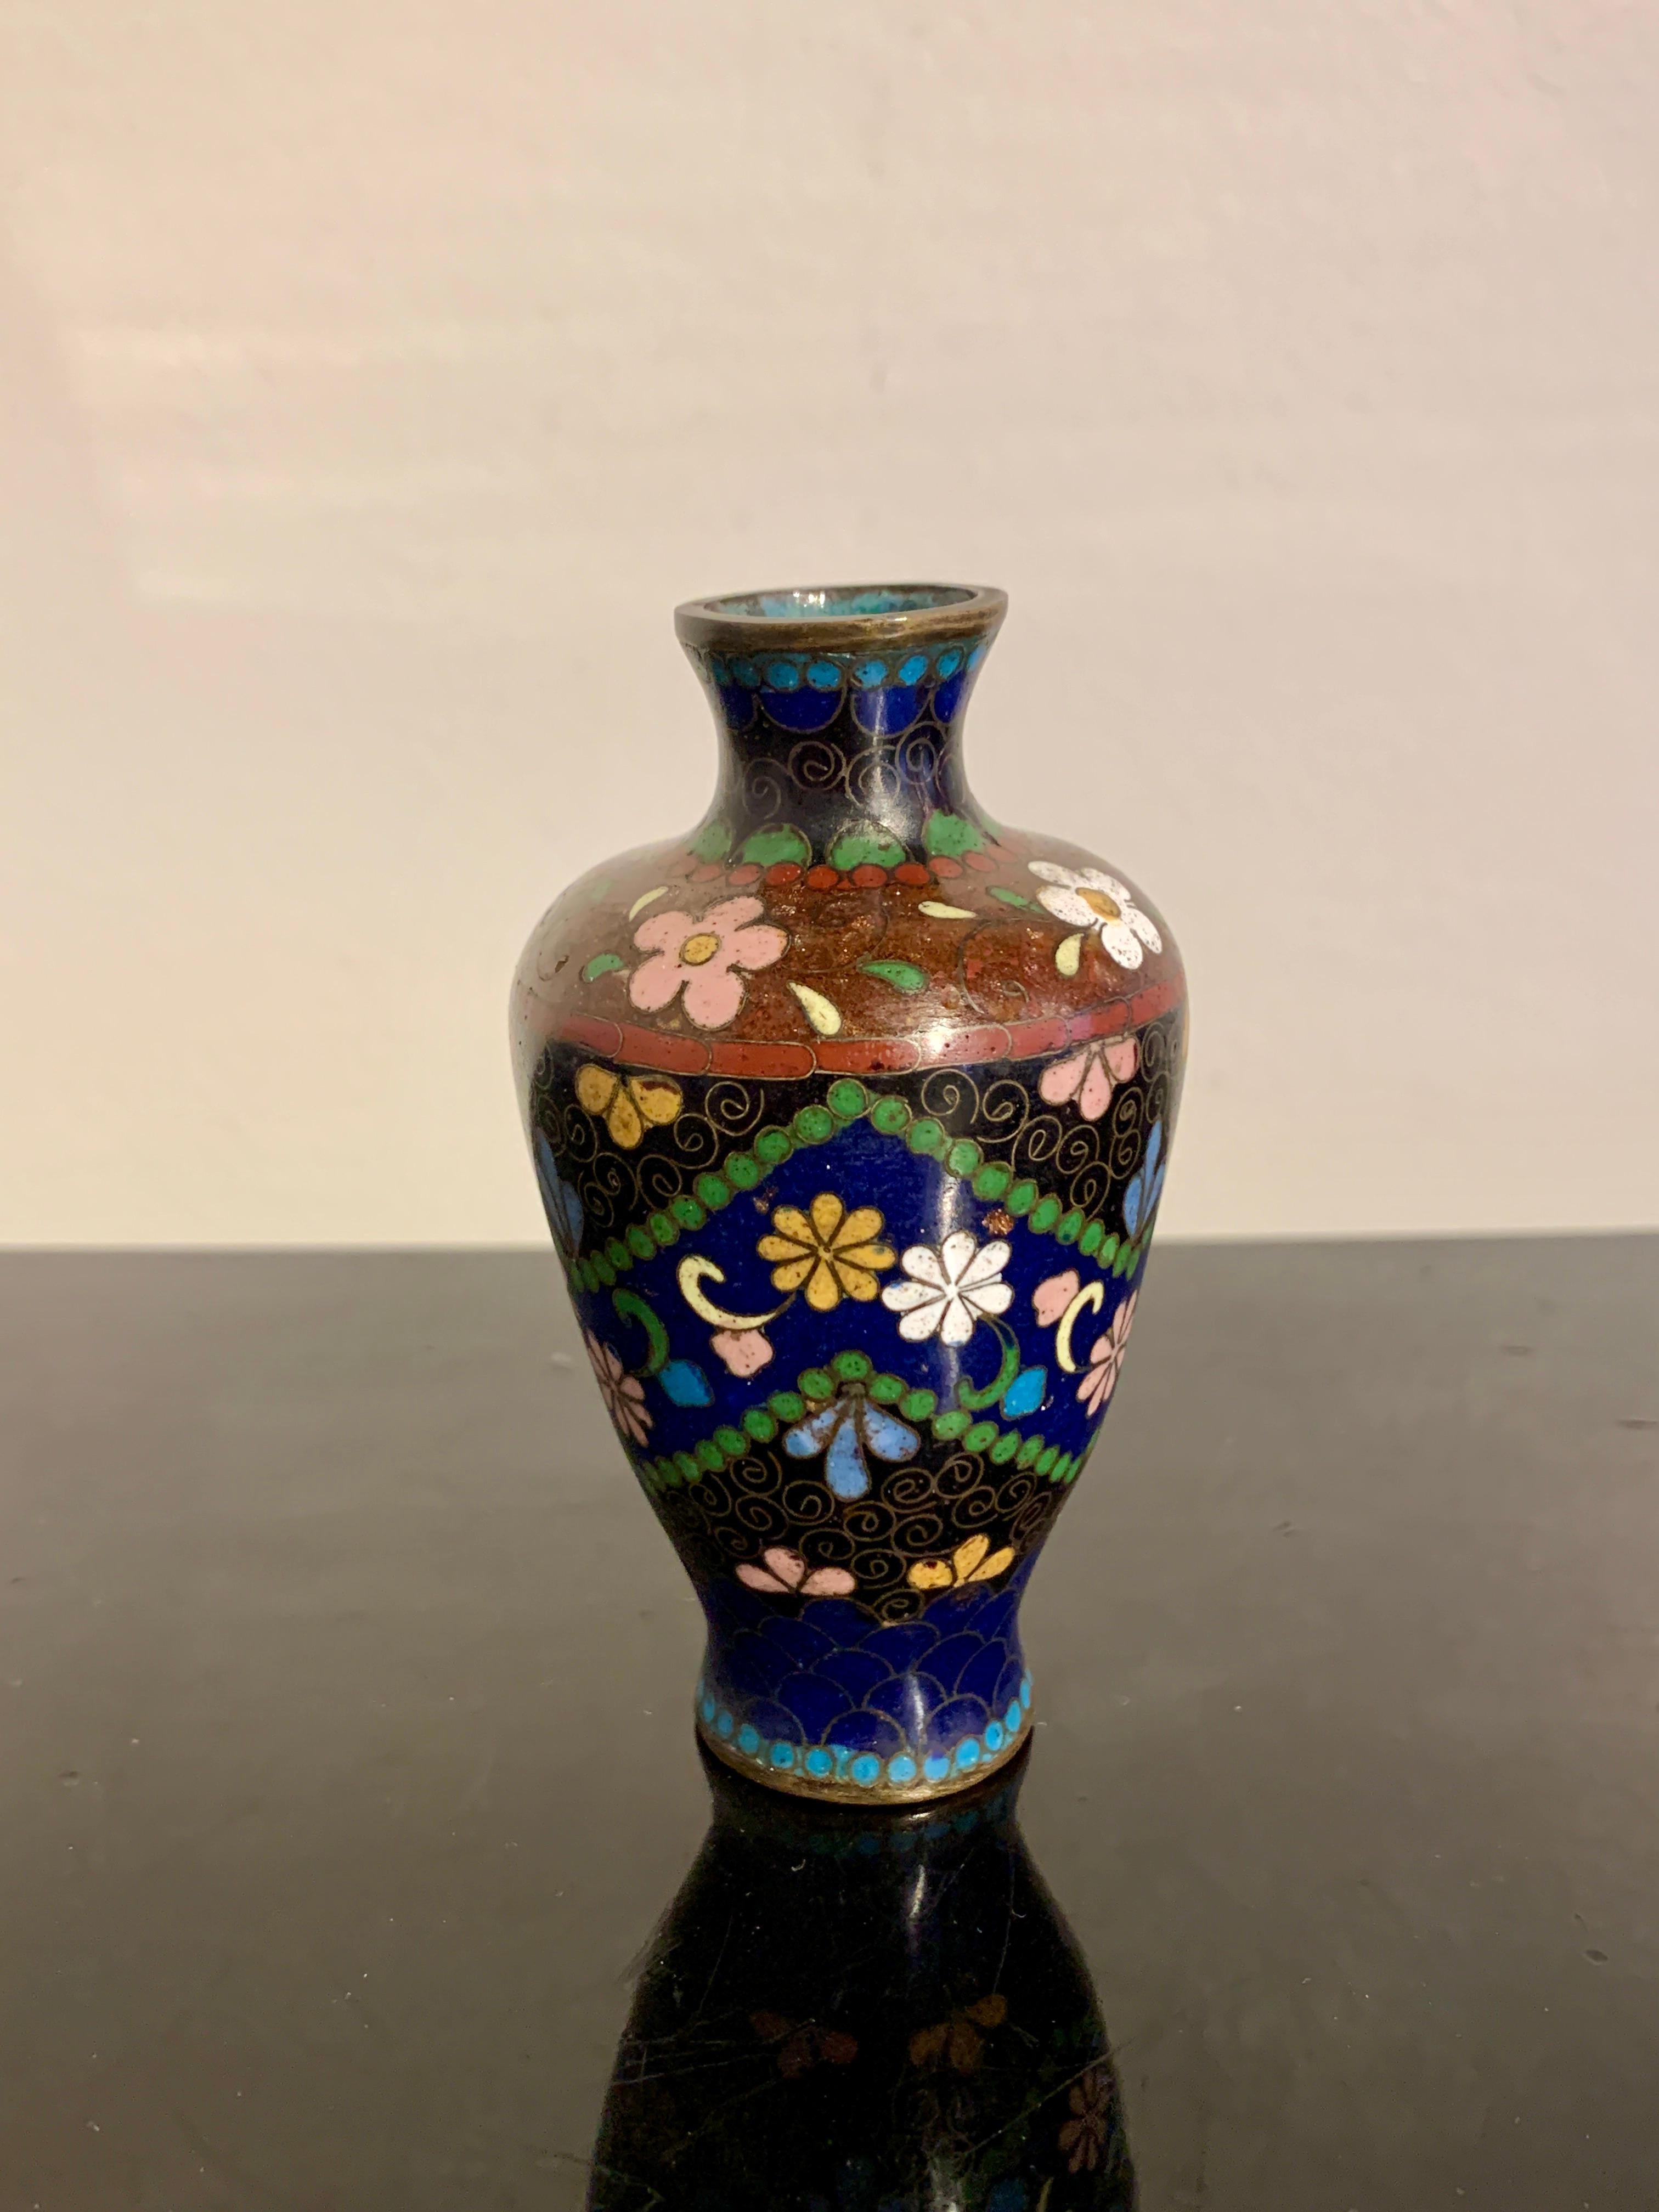 Group of Five Small Japanese Cloisonne Vases, Meiji Period, Early 20th C, Japan 2